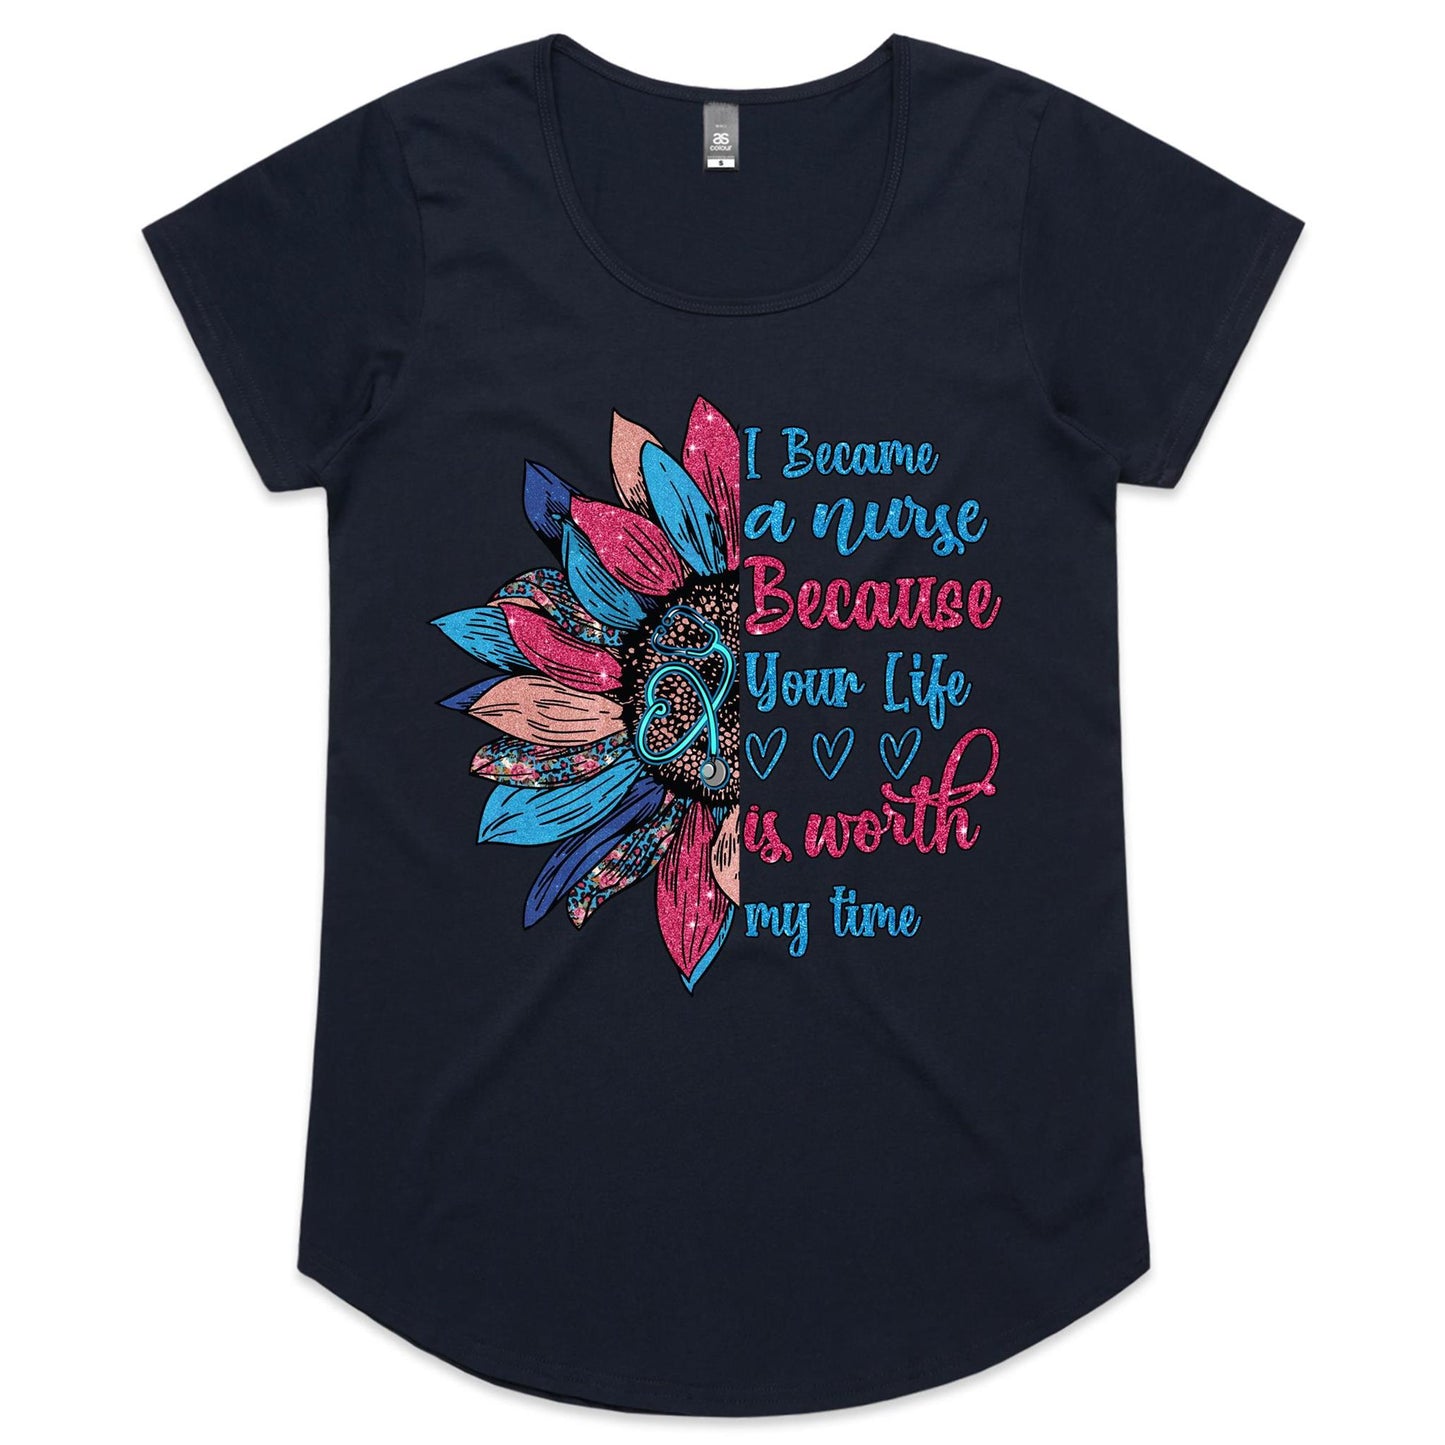 Your Life is Worth It Nurse Womens Scoop Neck T-Shirt